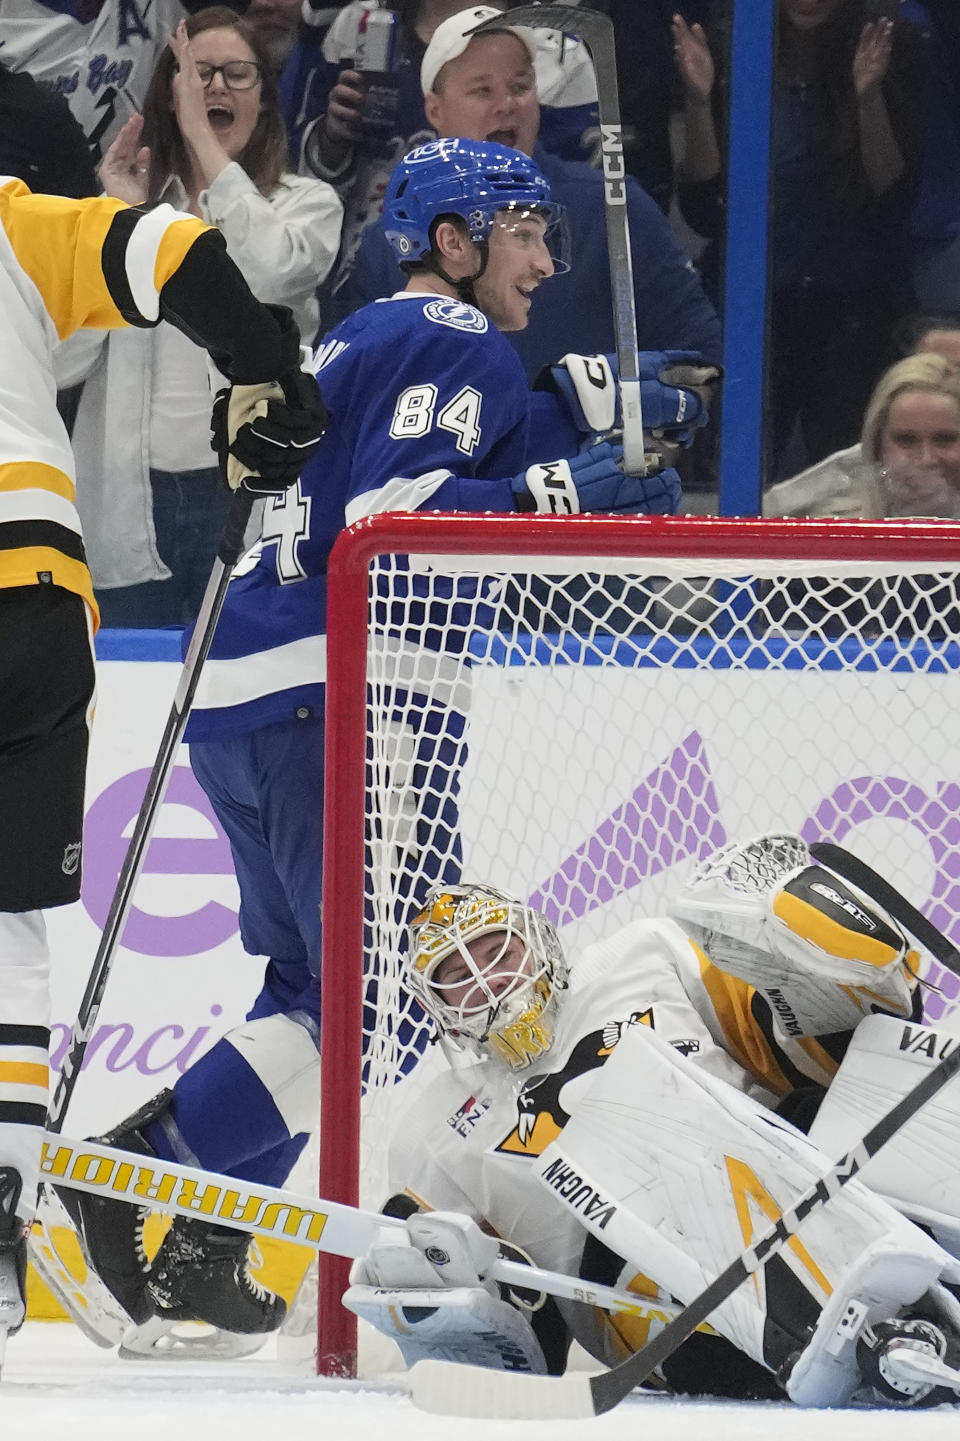 Tampa Bay Lightning left wing Tanner Jeannot (84) celebrates after scoring past Pittsburgh Penguins goaltender Tristan Jarry (35) during the first period of an NHL hockey game Thursday, Nov. 30, 2023, in Tampa, Fla. (AP Photo/Chris O'Meara)